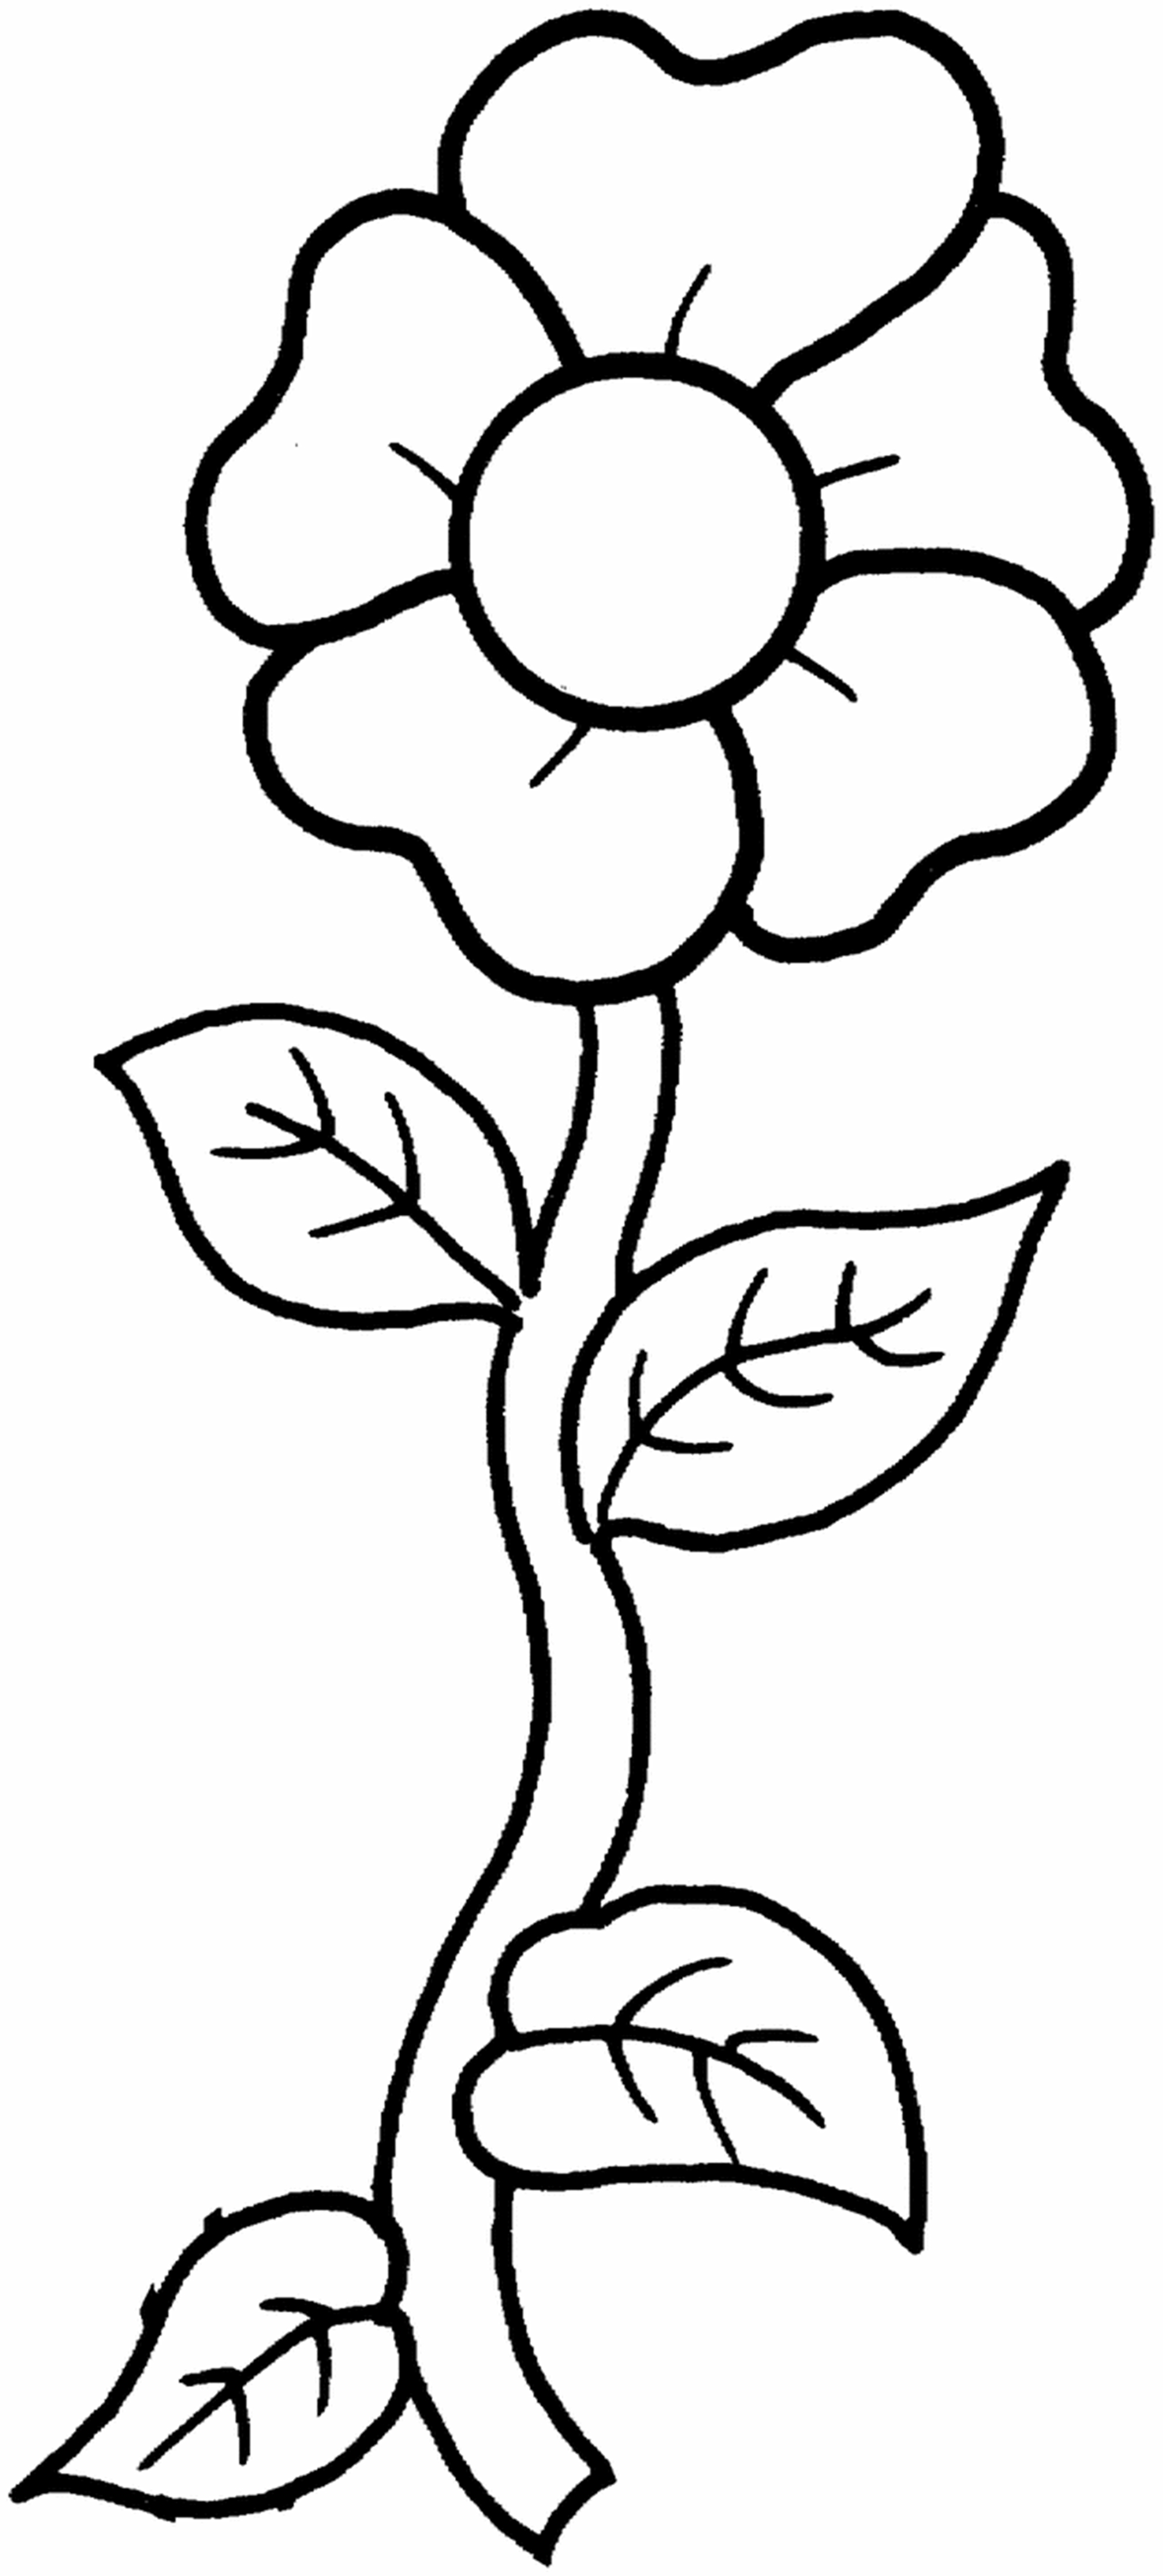 Free Printable Flower Coloring Pages For Kids Best Coloring Wallpapers Download Free Images Wallpaper [coloring365.blogspot.com]